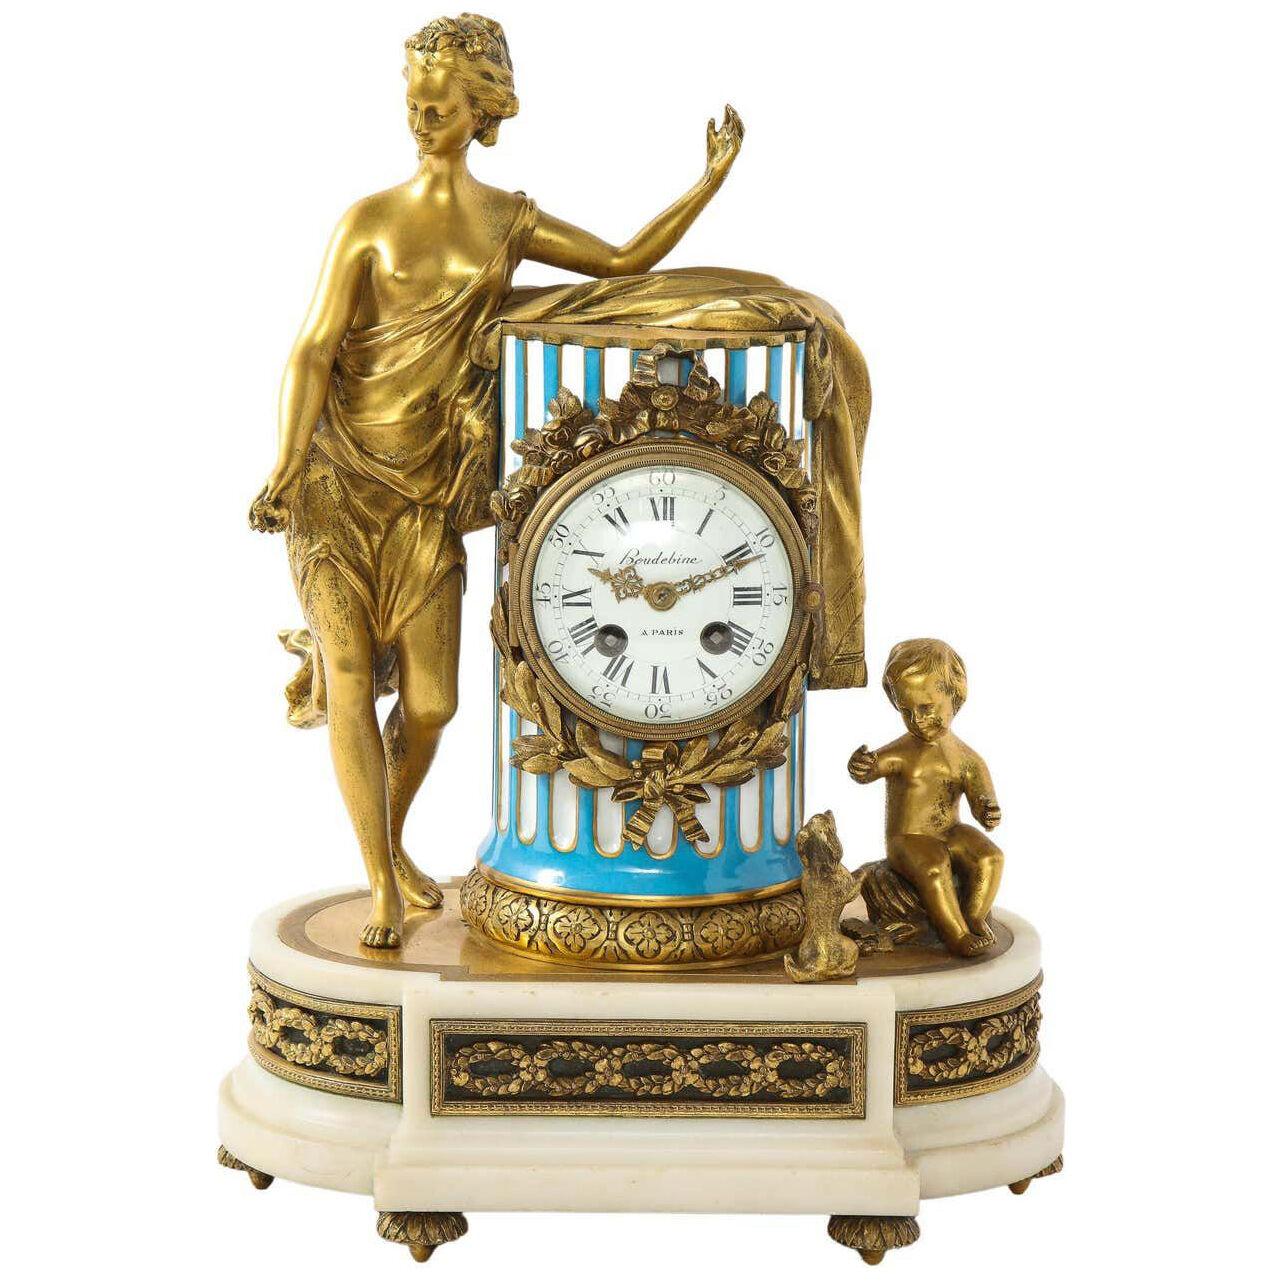 Fine French Ormolu, Marble, and Sevres Style Porcelain "Marie Antoinette" Clock